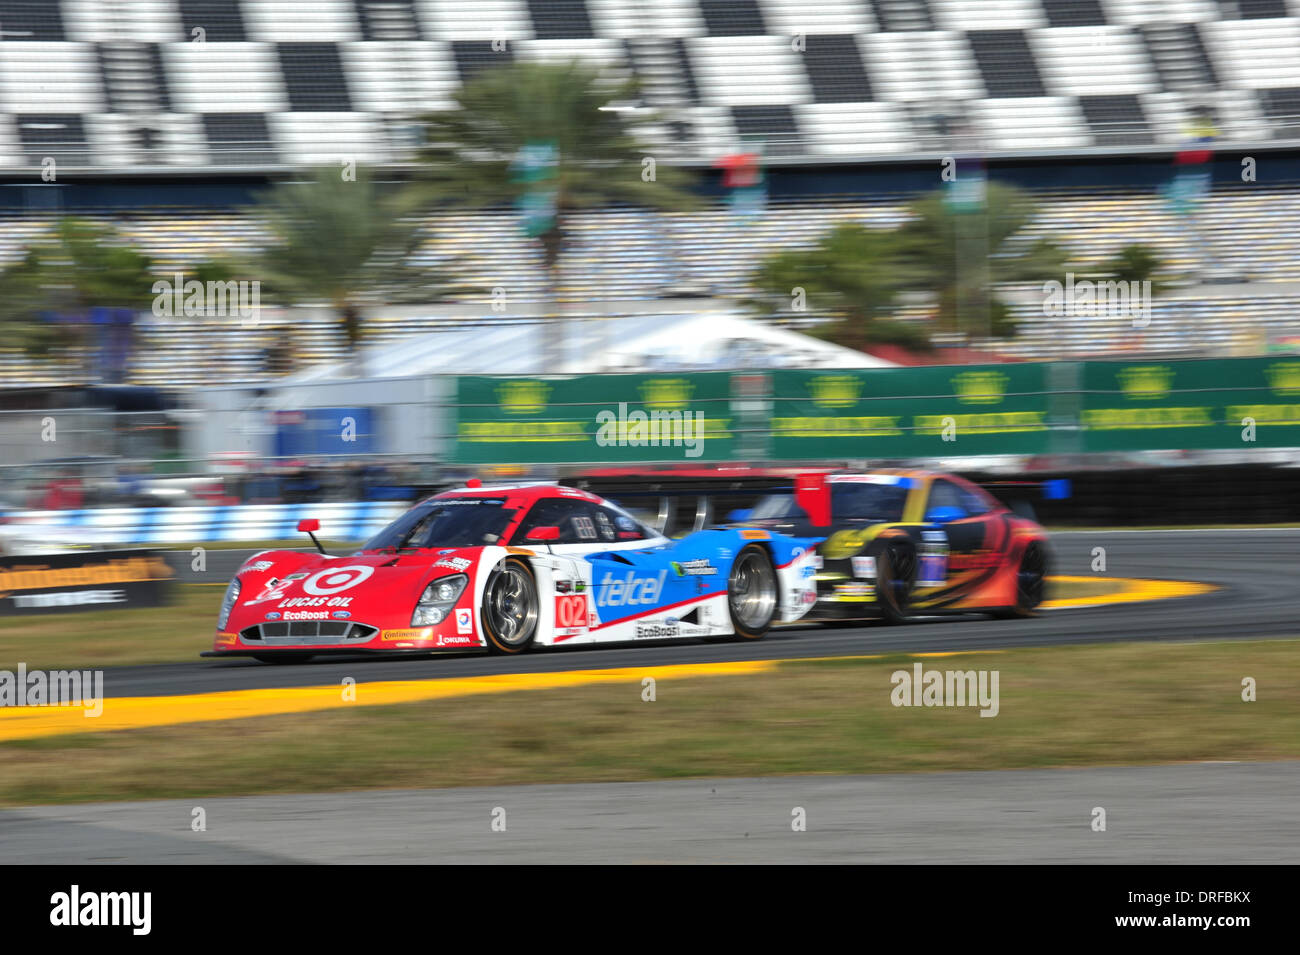 Daytona, USA. 23rd Jan, 2014. The Tudor United Sportcar Championship Rolex 24 Hours of Daytona Practise which was newly formed by the merge of Grand-Am series and the American Le Mans Series . #02 CHIP GANASSI RACING RILEY DP FORD ECOBOOST SCOTT DIXON (NZL) TONY KANAAN (BRA) MARINO FRANCHITTI (SCO) KYLE LARSON (USA) Credit:  Action Plus Sports/Alamy Live News Stock Photo